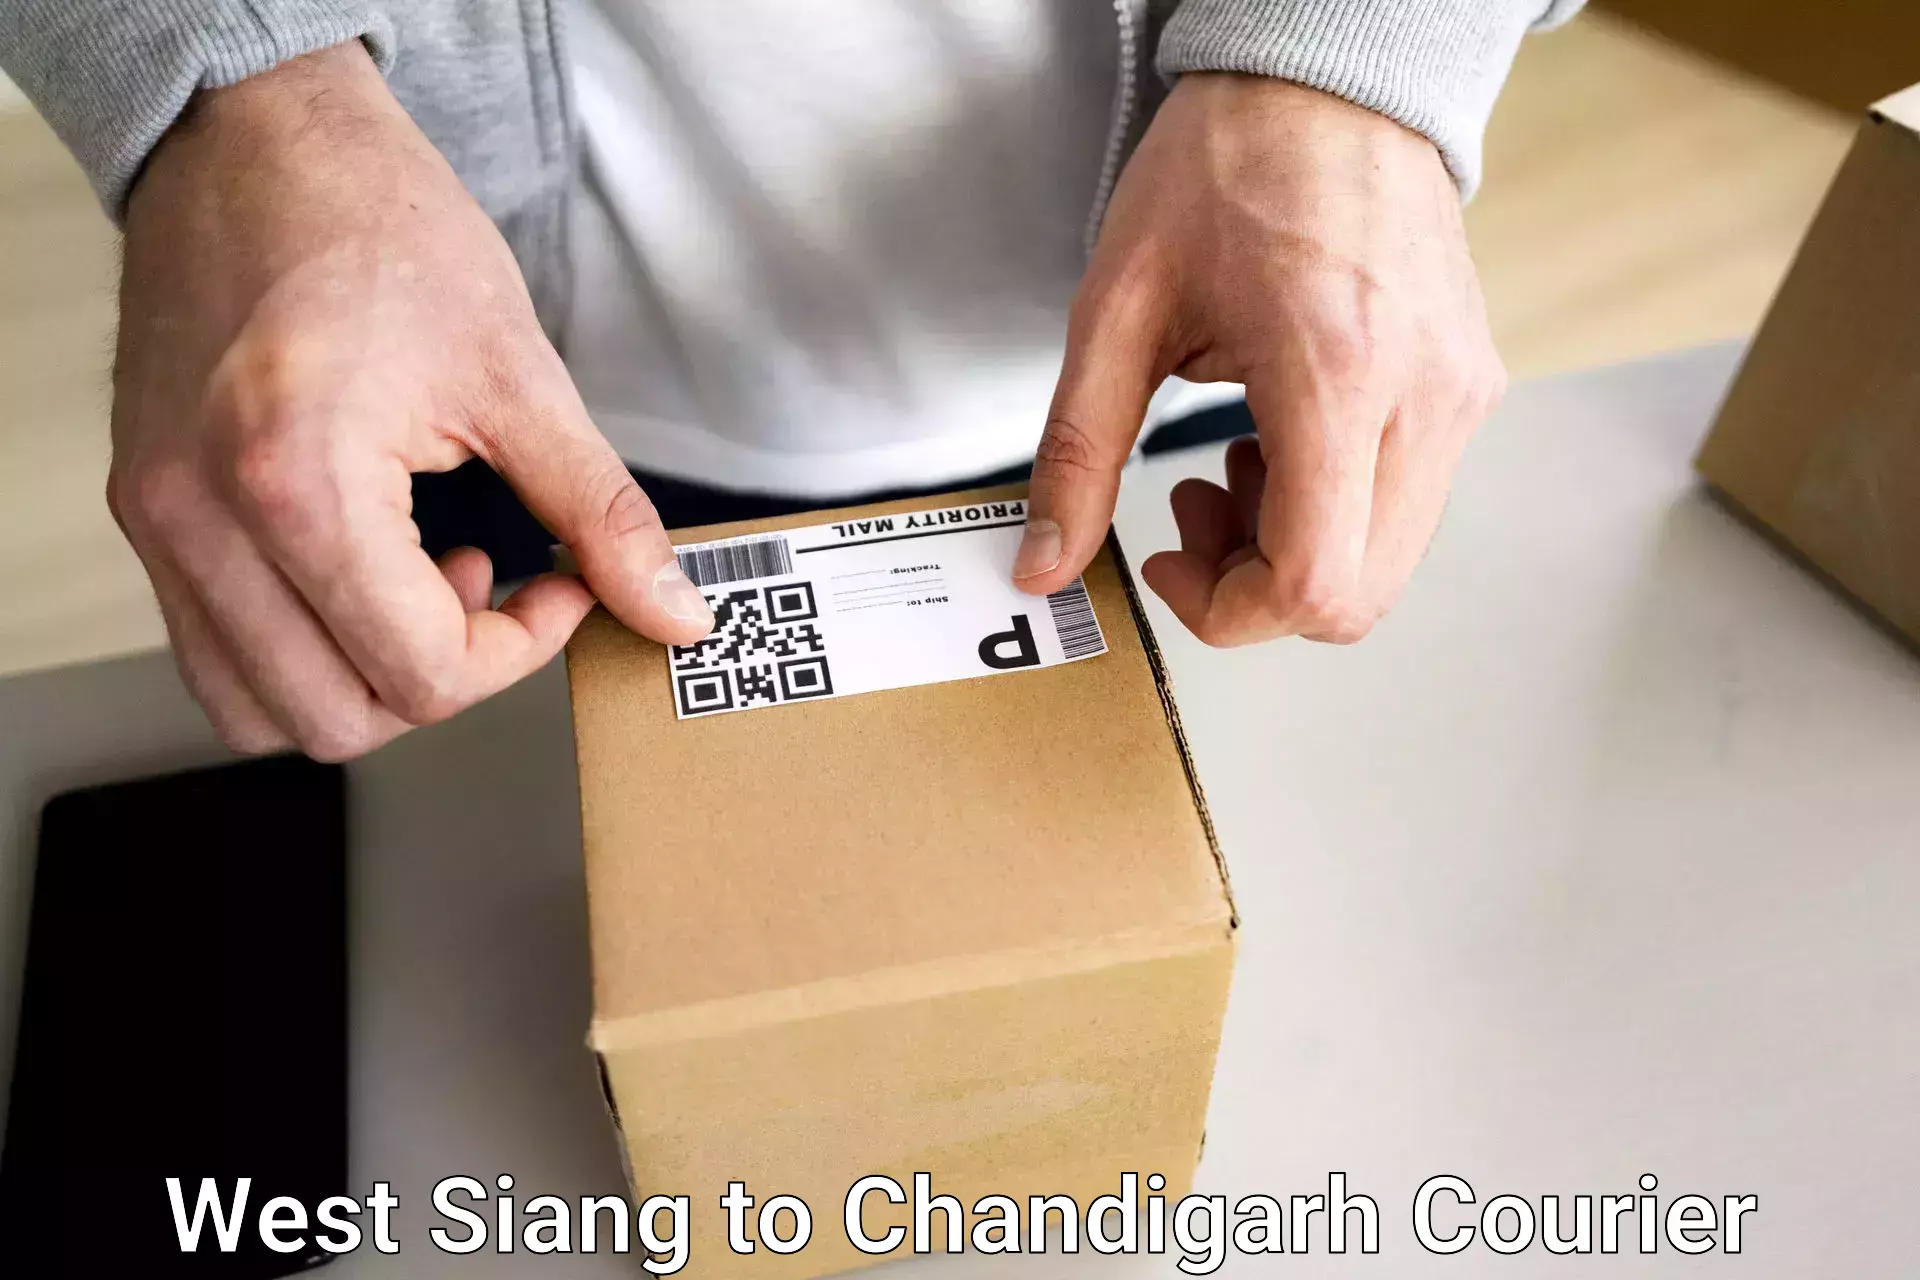 Luggage transport solutions West Siang to Chandigarh